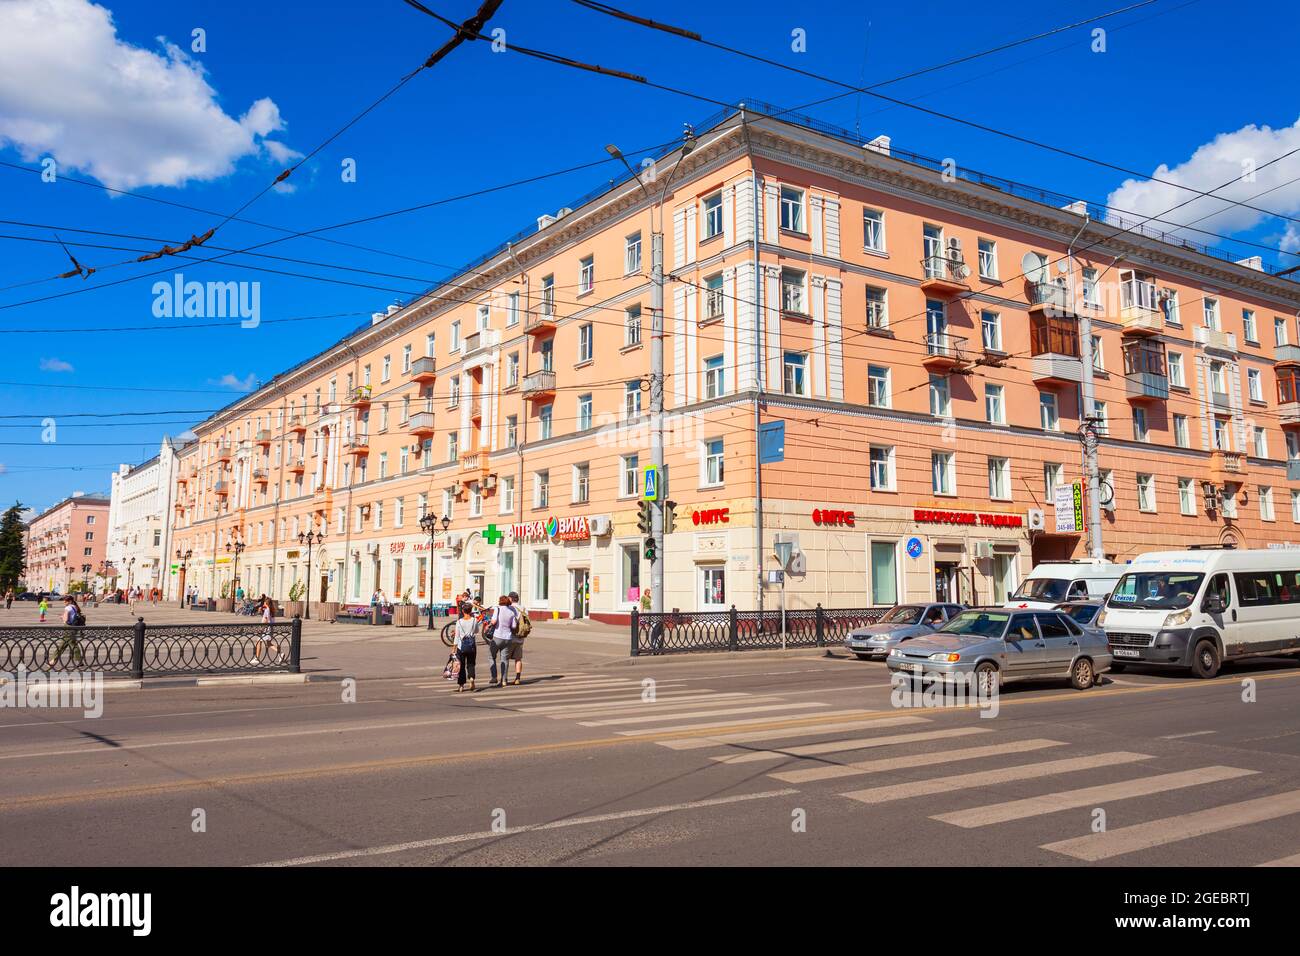 IVANOVO, RUSSIA - AUGUST 07, 2020: Ivanovo city centre is a part of Golden Ring of Russia Stock Photo